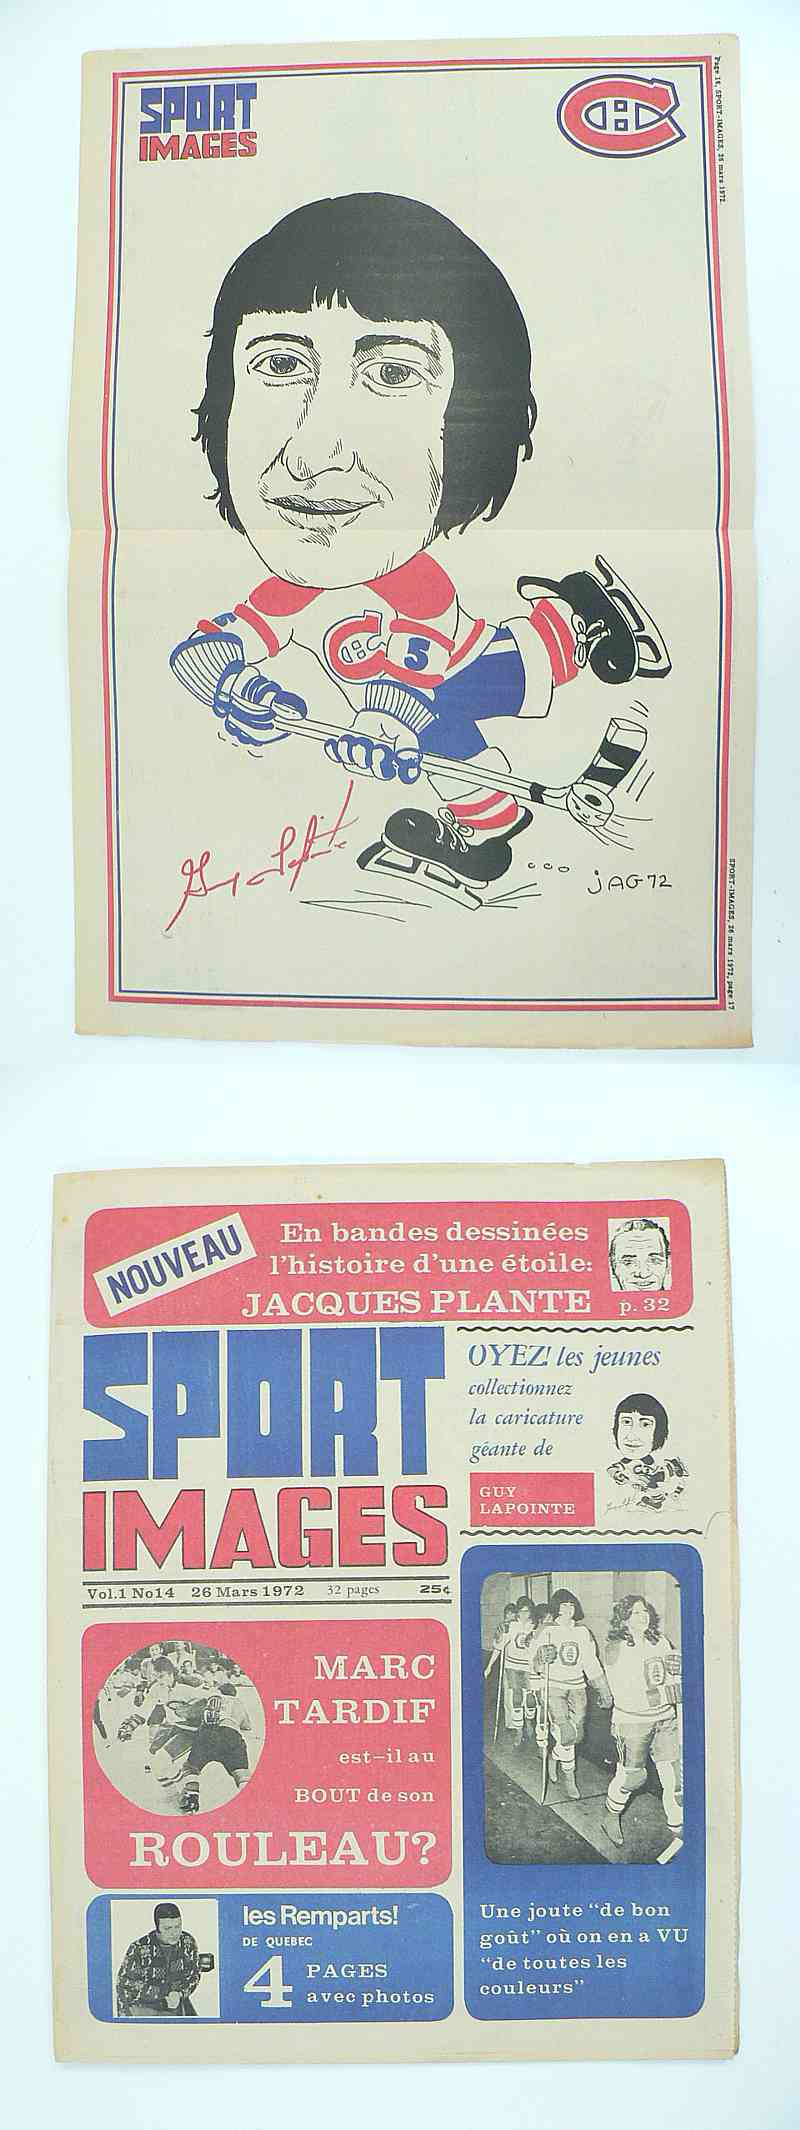 1972 SPORT IMAGES FULL MAGAZINE G.LAPOINTE POSTER photo